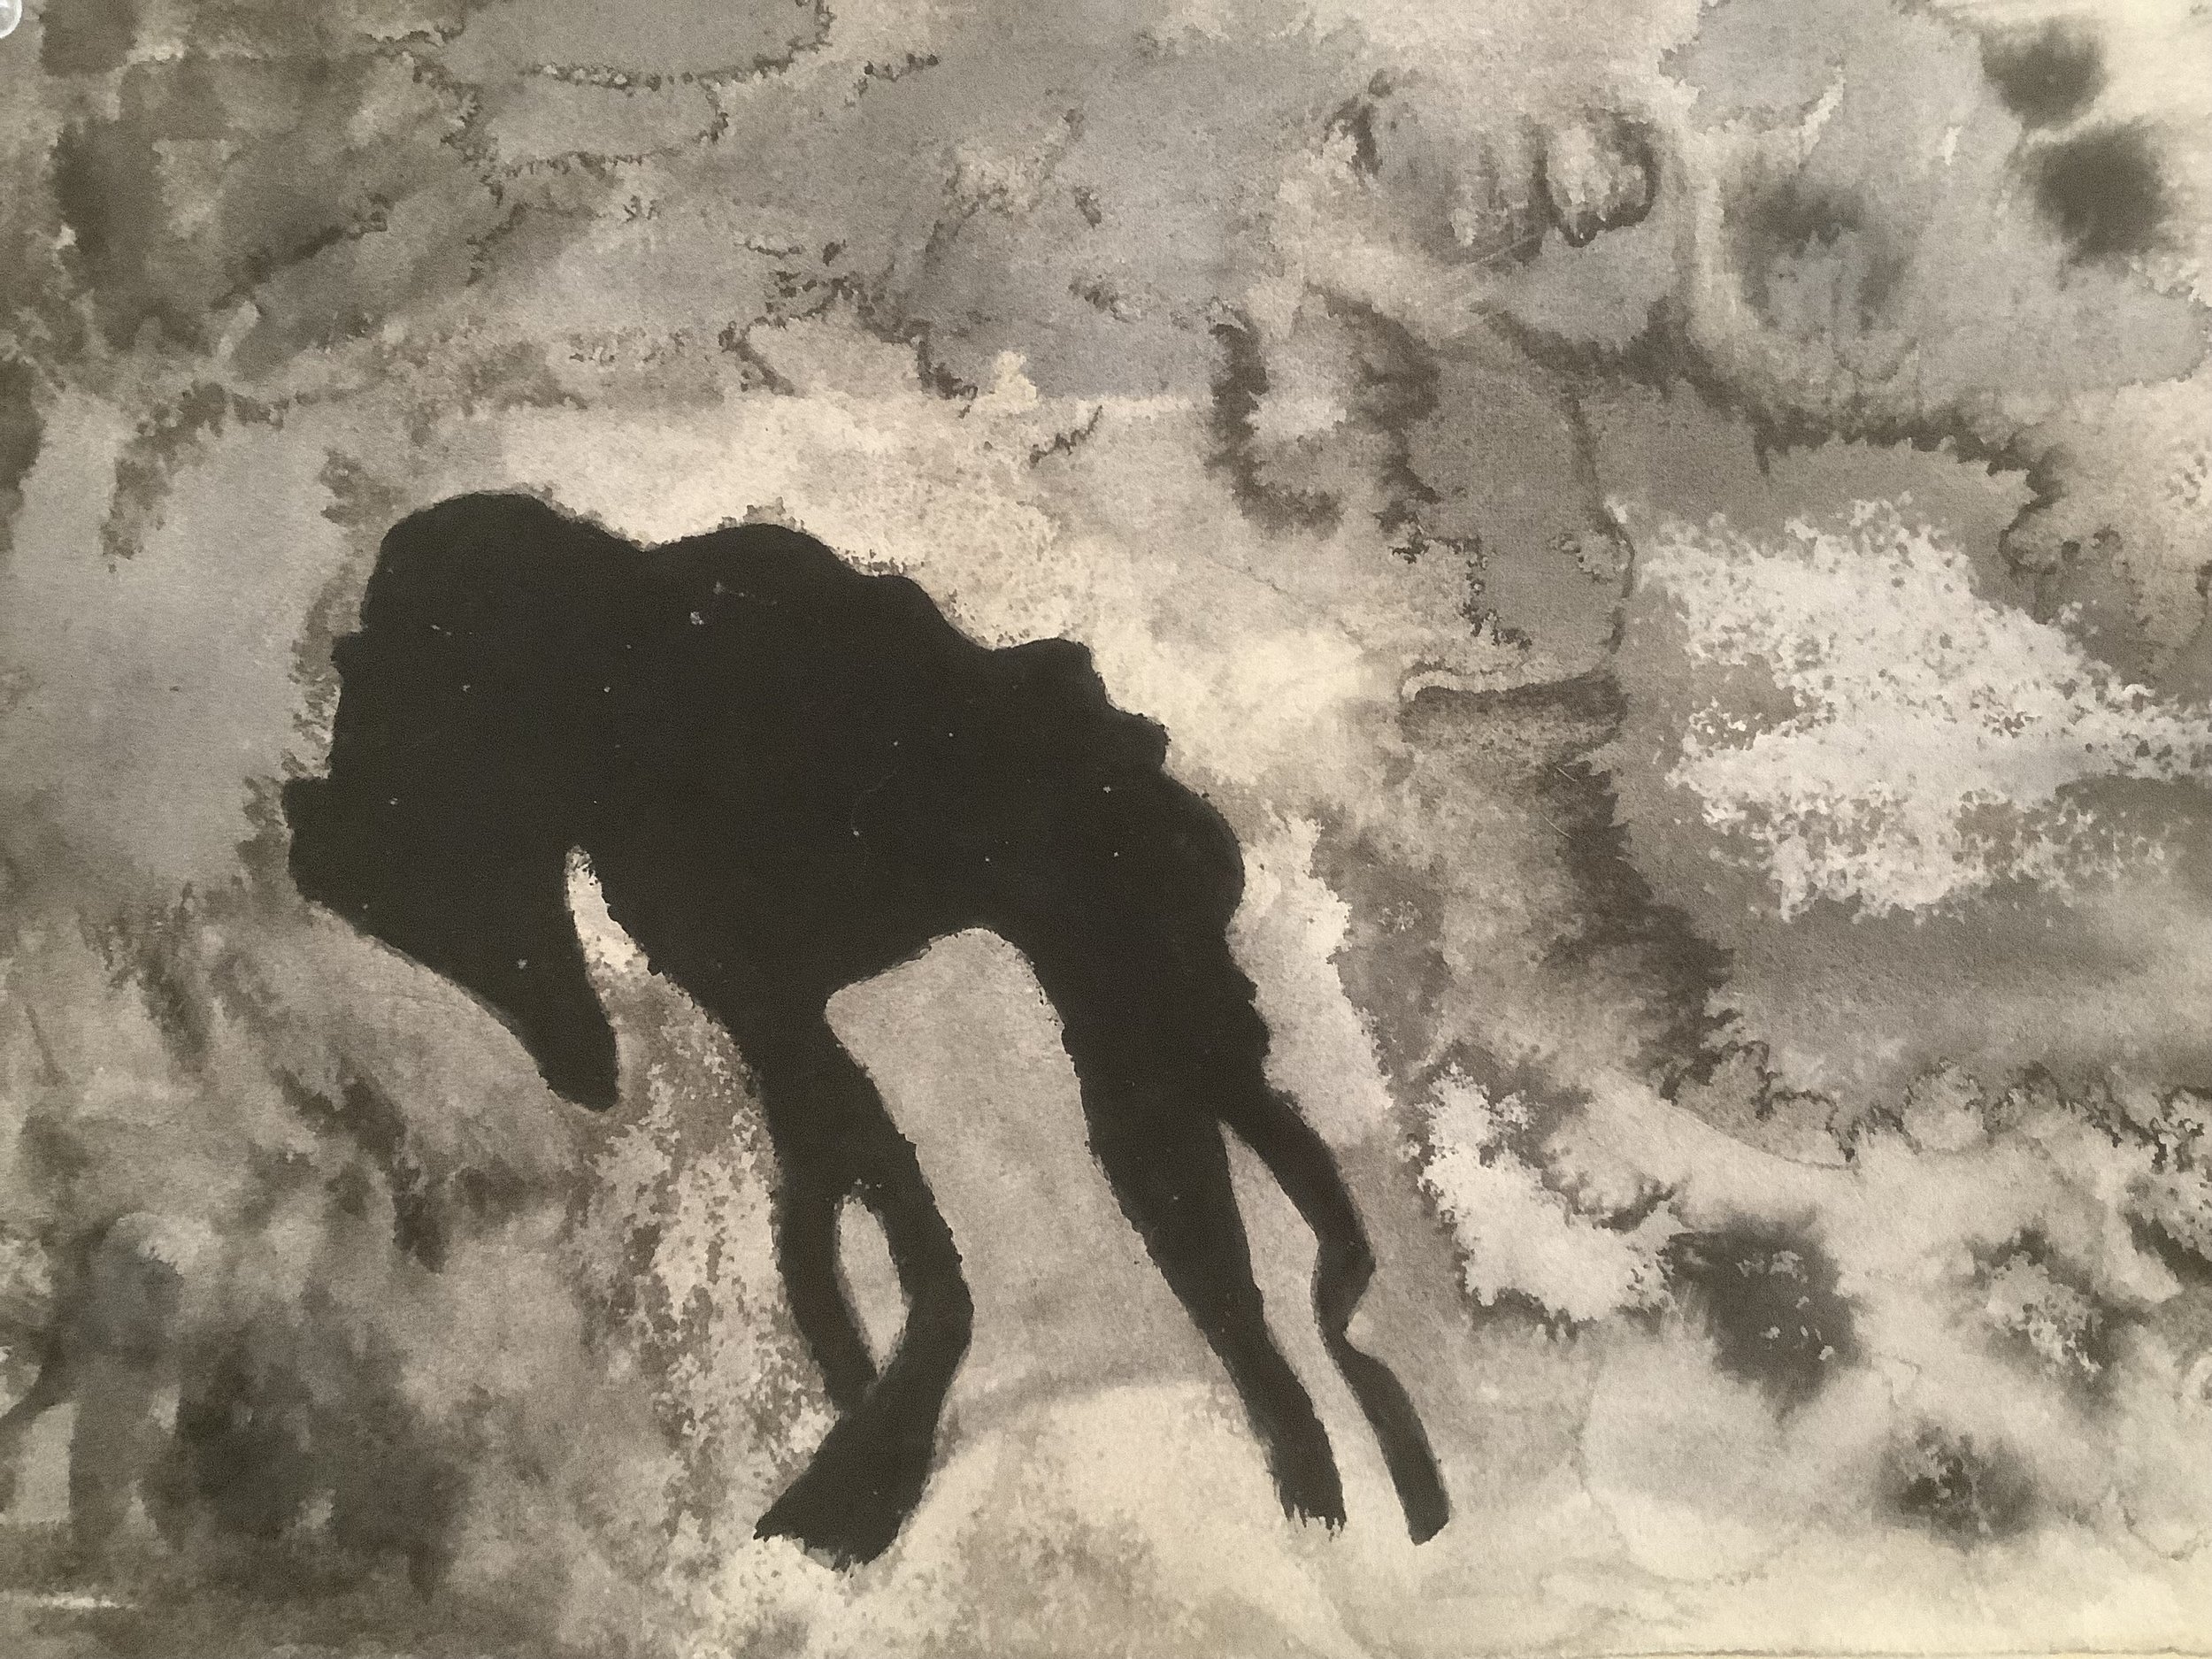    Dog Shadow  - black walnut on archival paper - monotype, 13” x 9.5” SOLD  